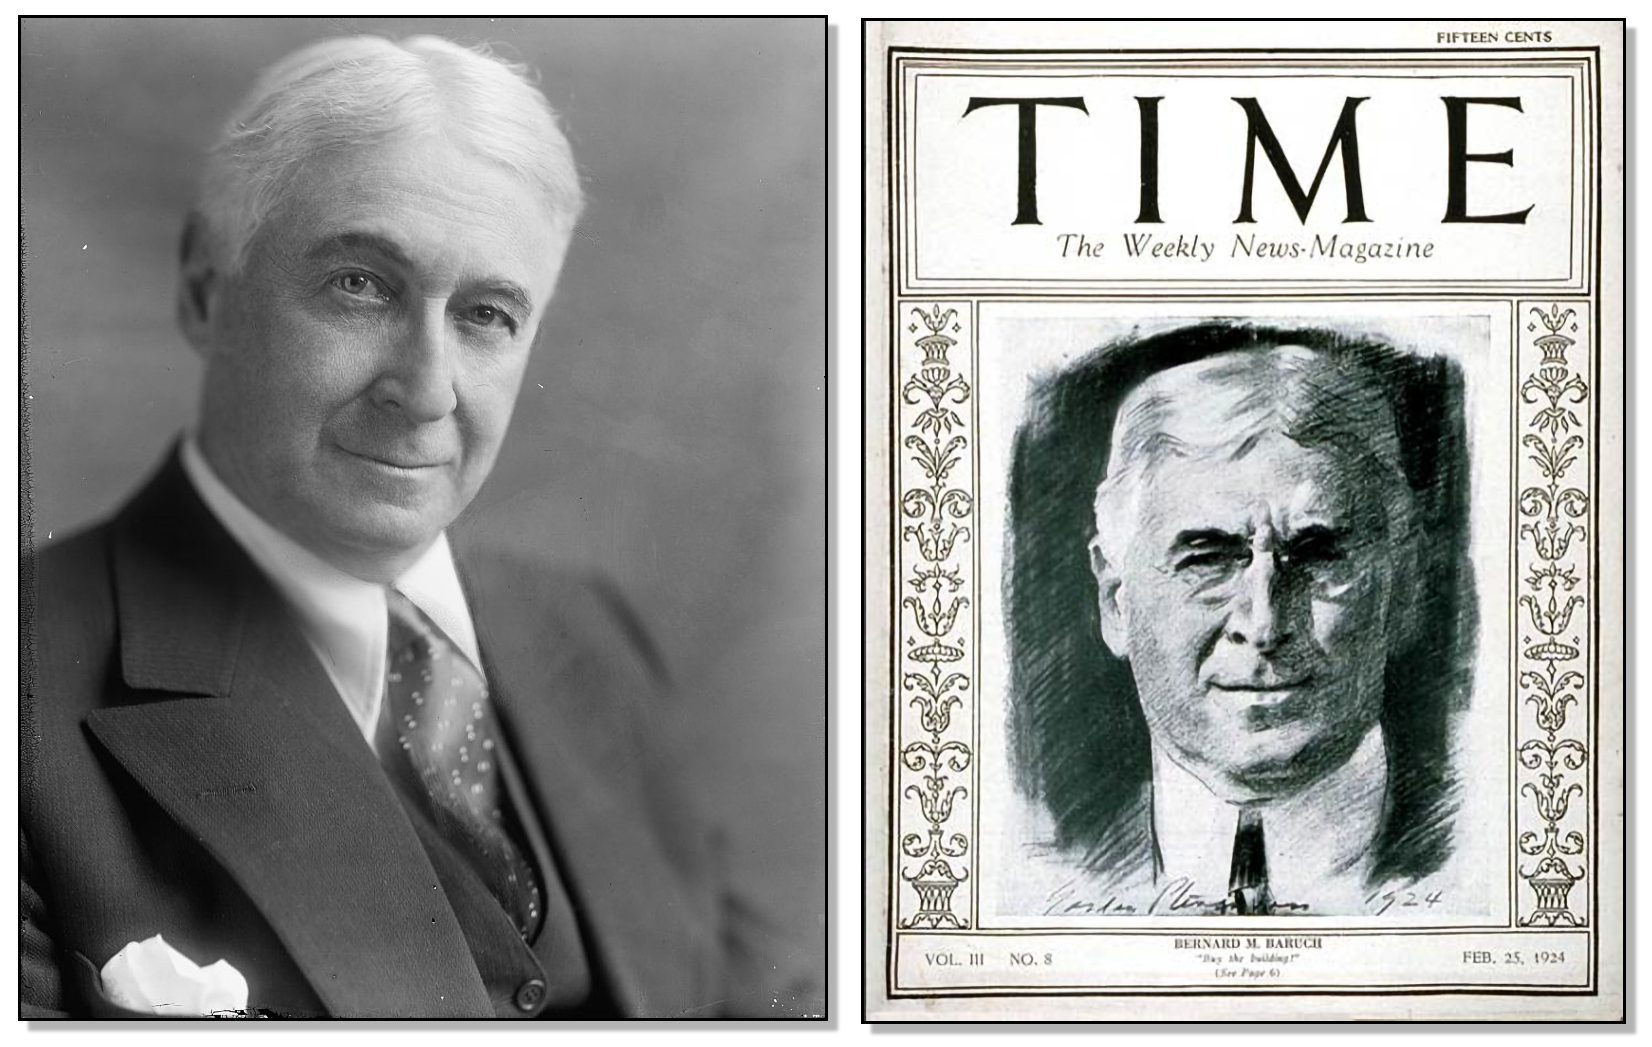 Left: Bernard Baruch portrait photograph courtesy Library of Congress, Public Domain.  Right: Bernard Baruch on the cover of Time magazine, 1924, Public Domain.